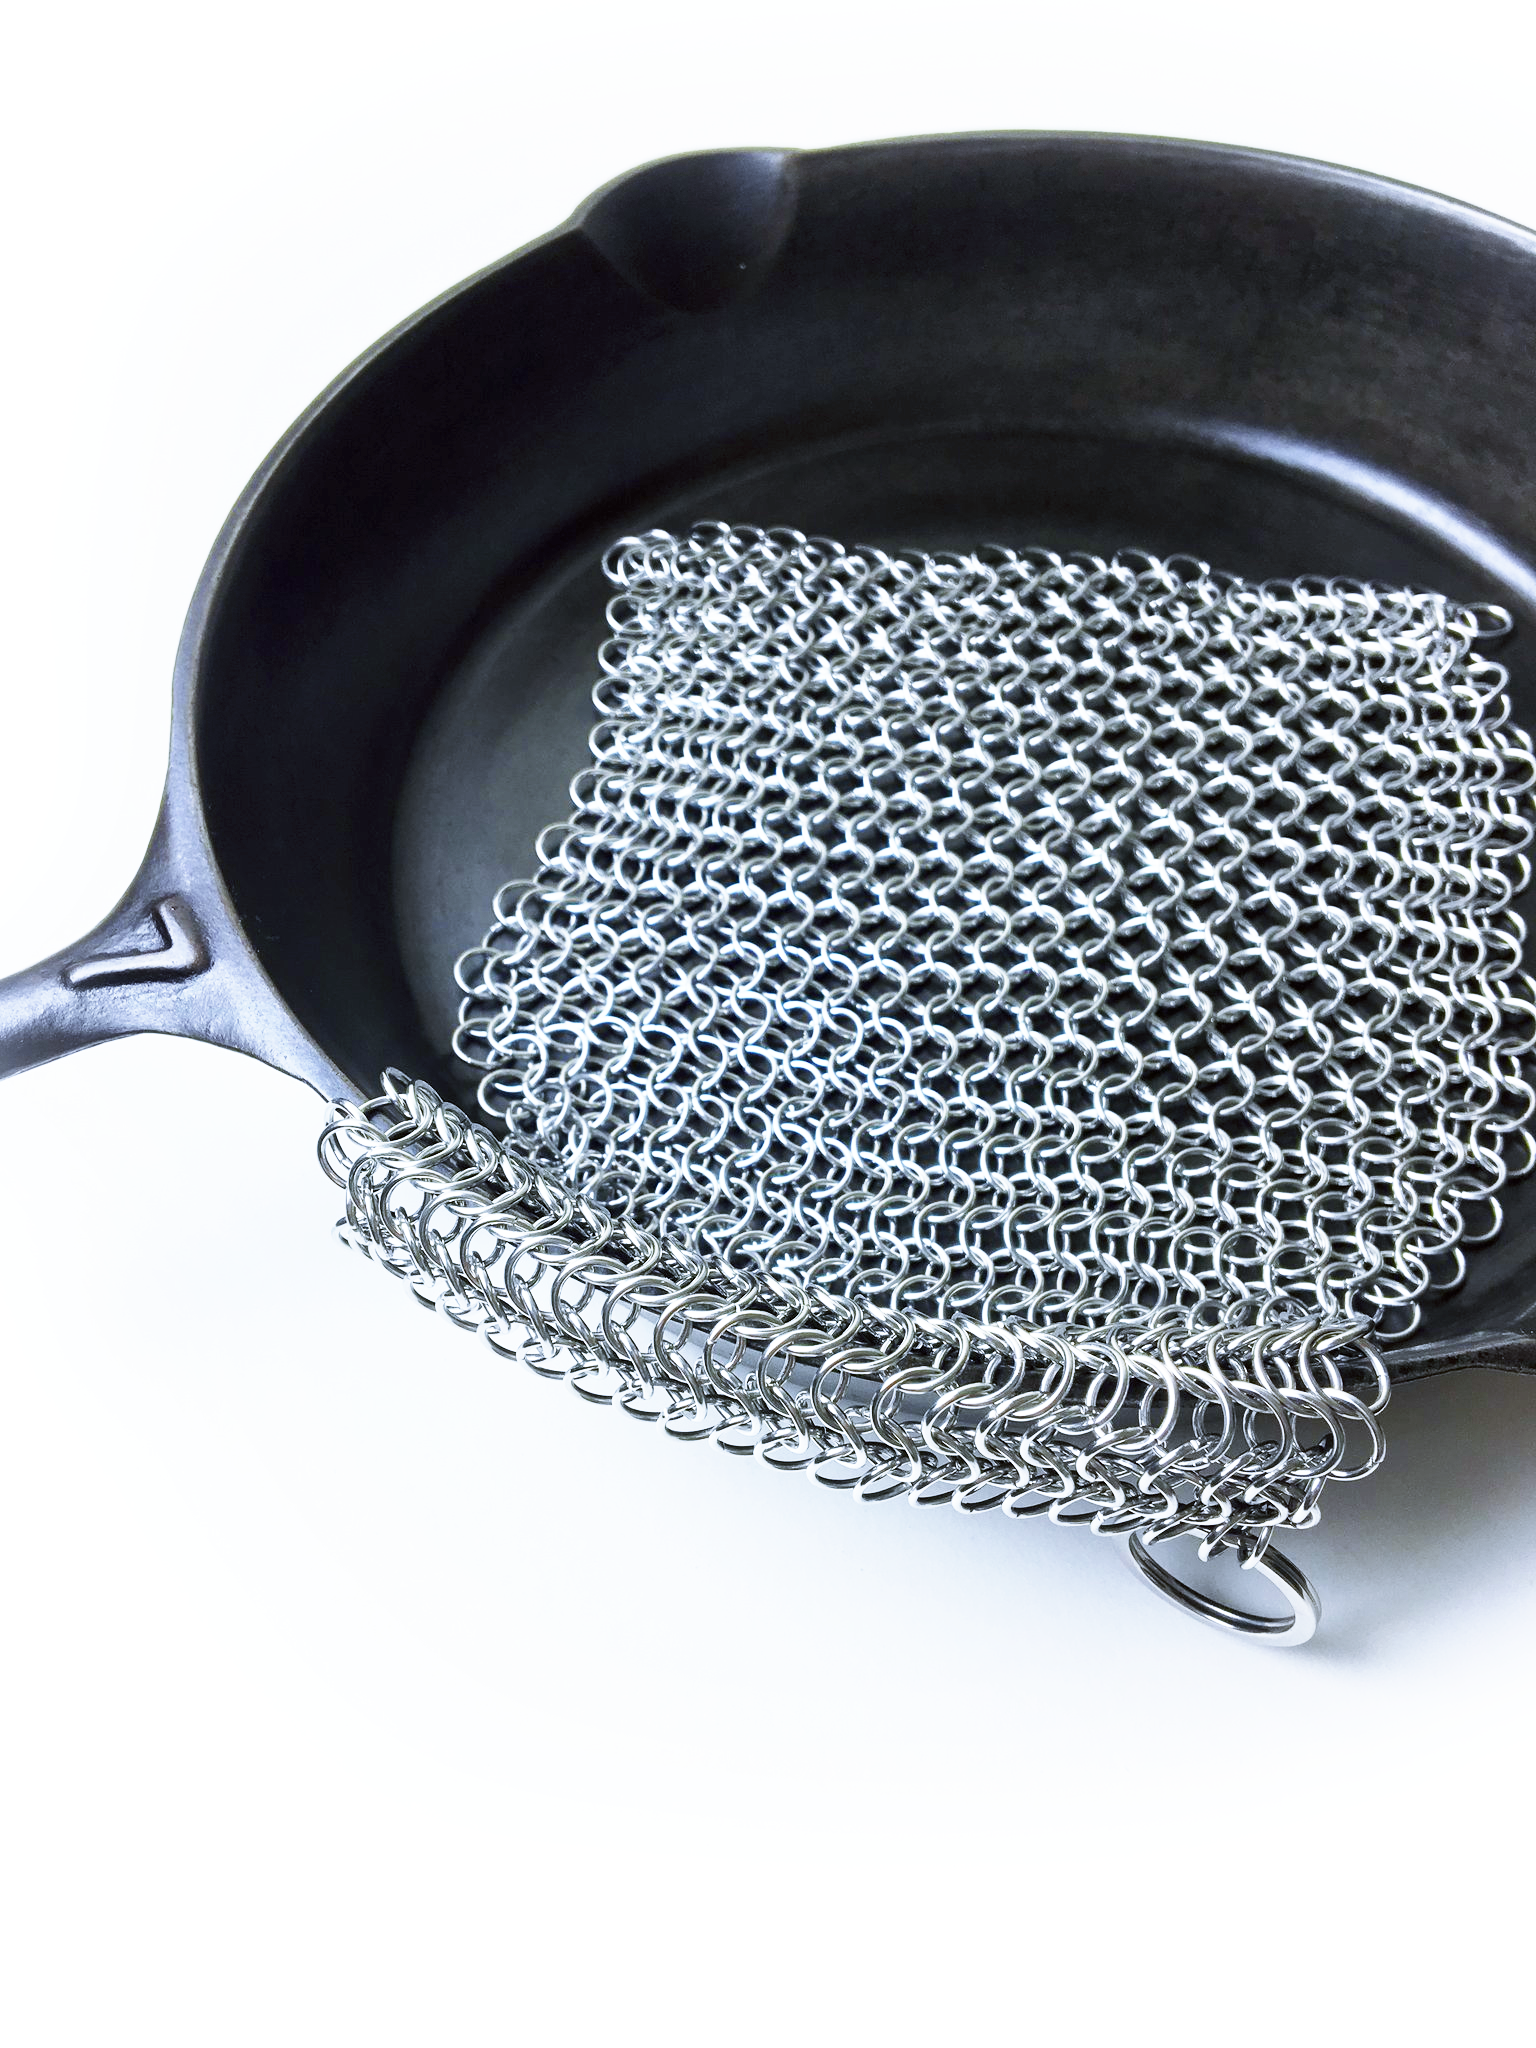 https://crisbee.org/cdn/shop/products/Chainmail_Display_with_Skillet_1_1b0c775d-6bc9-4ed6-a7de-daaac930b34d.png?v=1643848870&width=1946